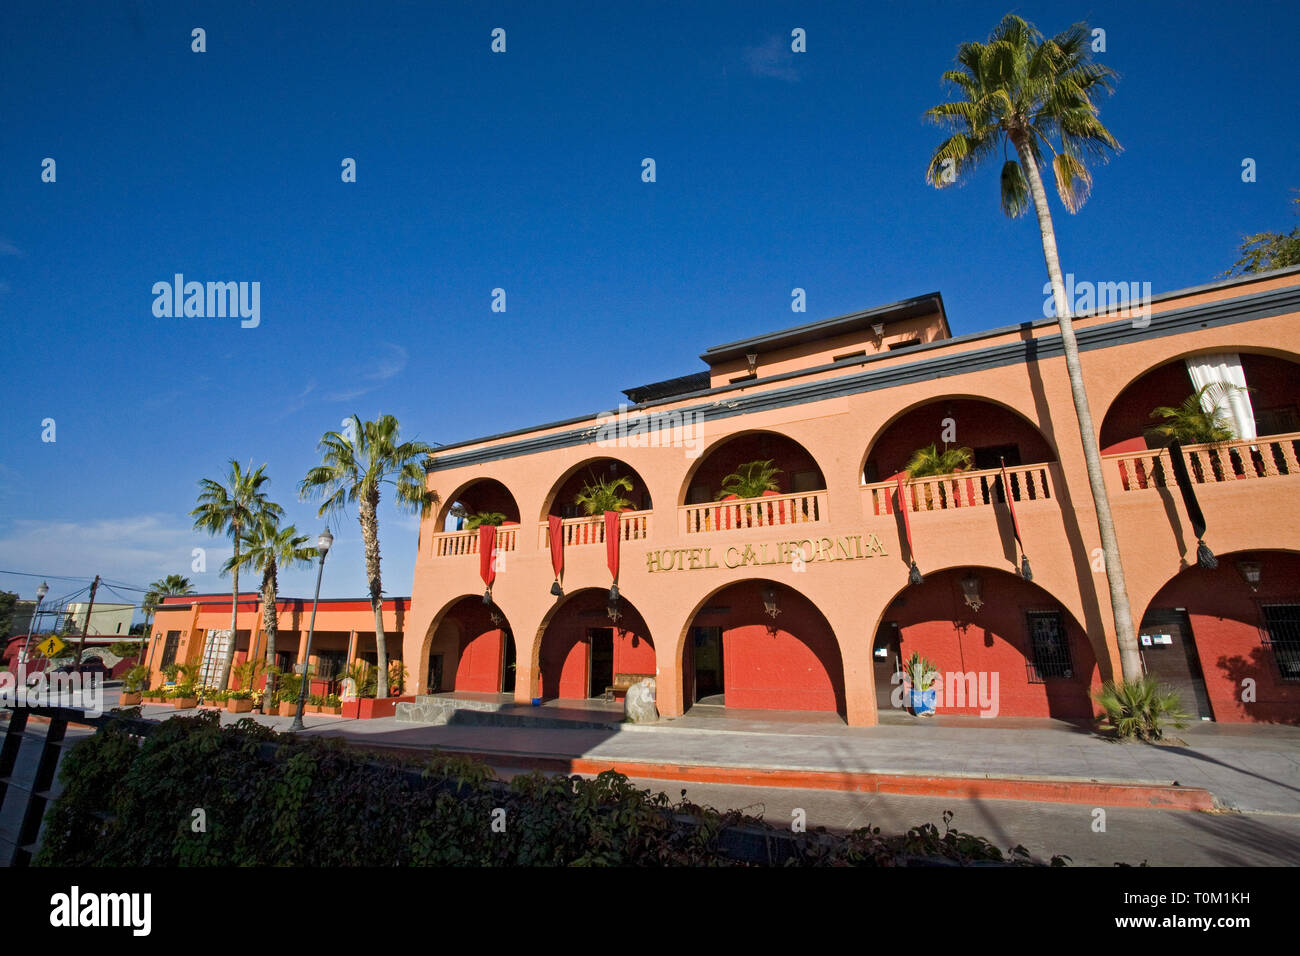 A front view of the famous Hotel California, in the small town of Todos Santos, in Baja, California Stock Photo